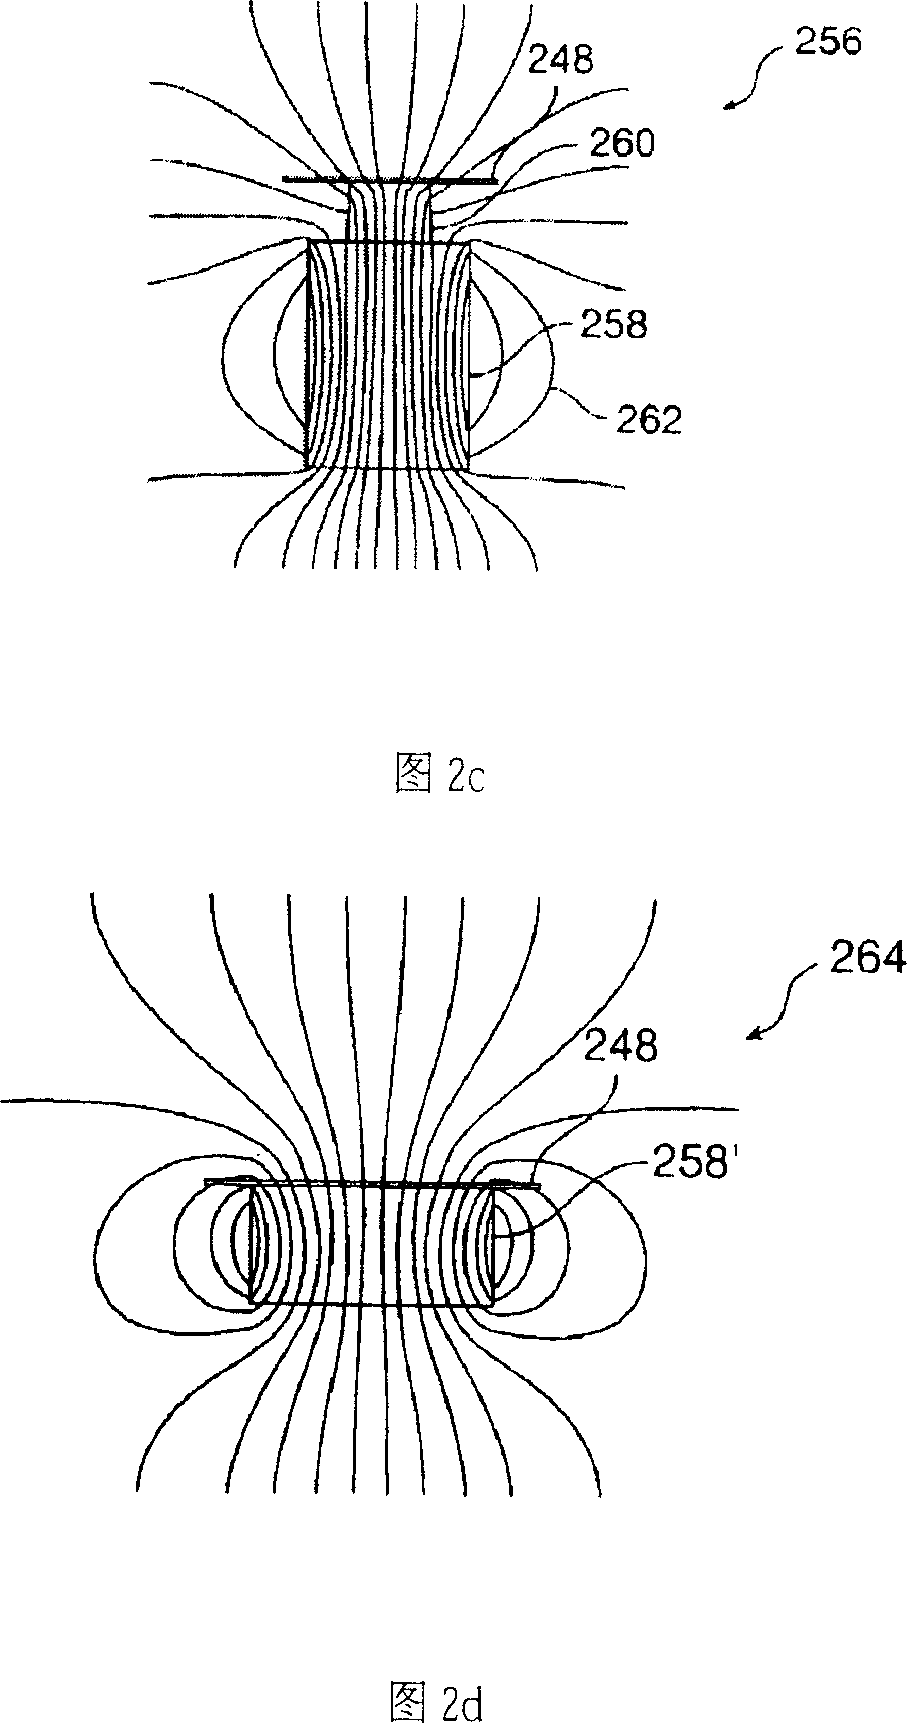 Apparatus for orienting magnetic flakes